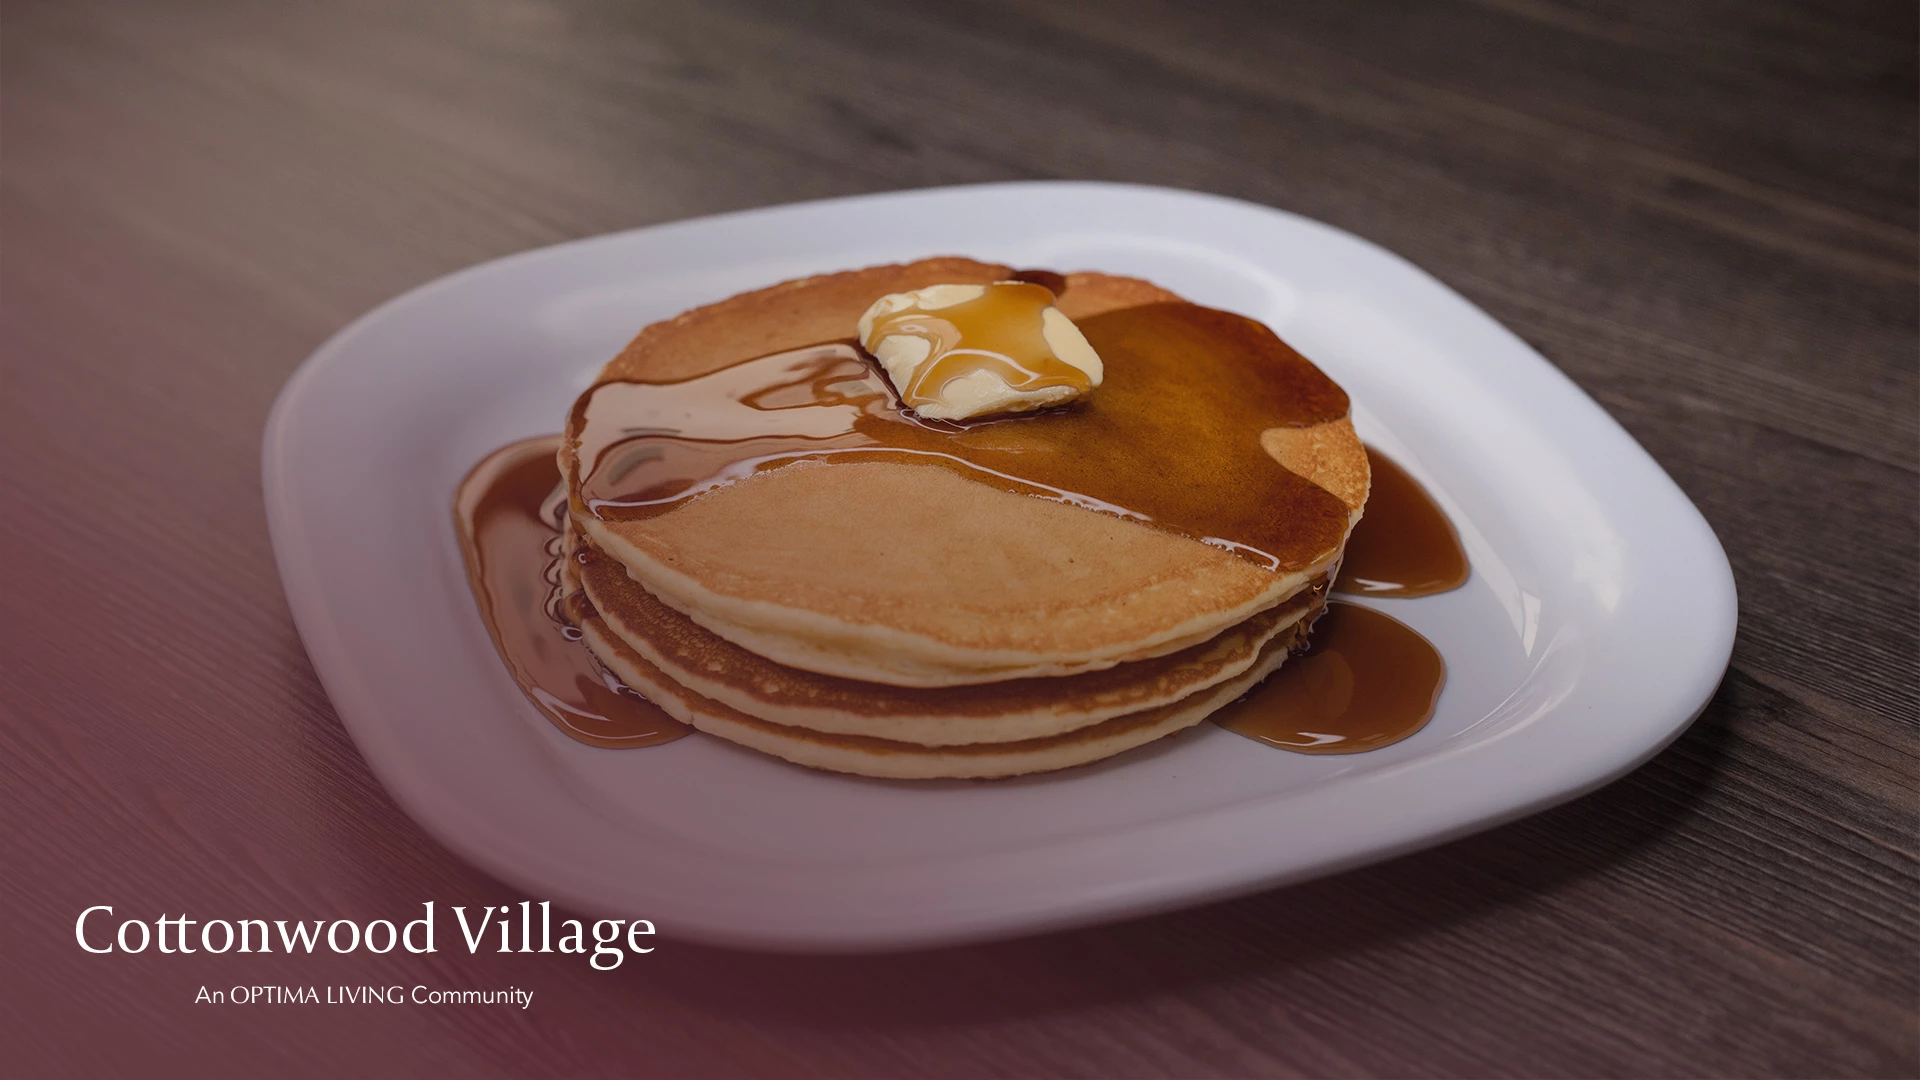 Event header for the pancake breakfast at Cottonwood Village